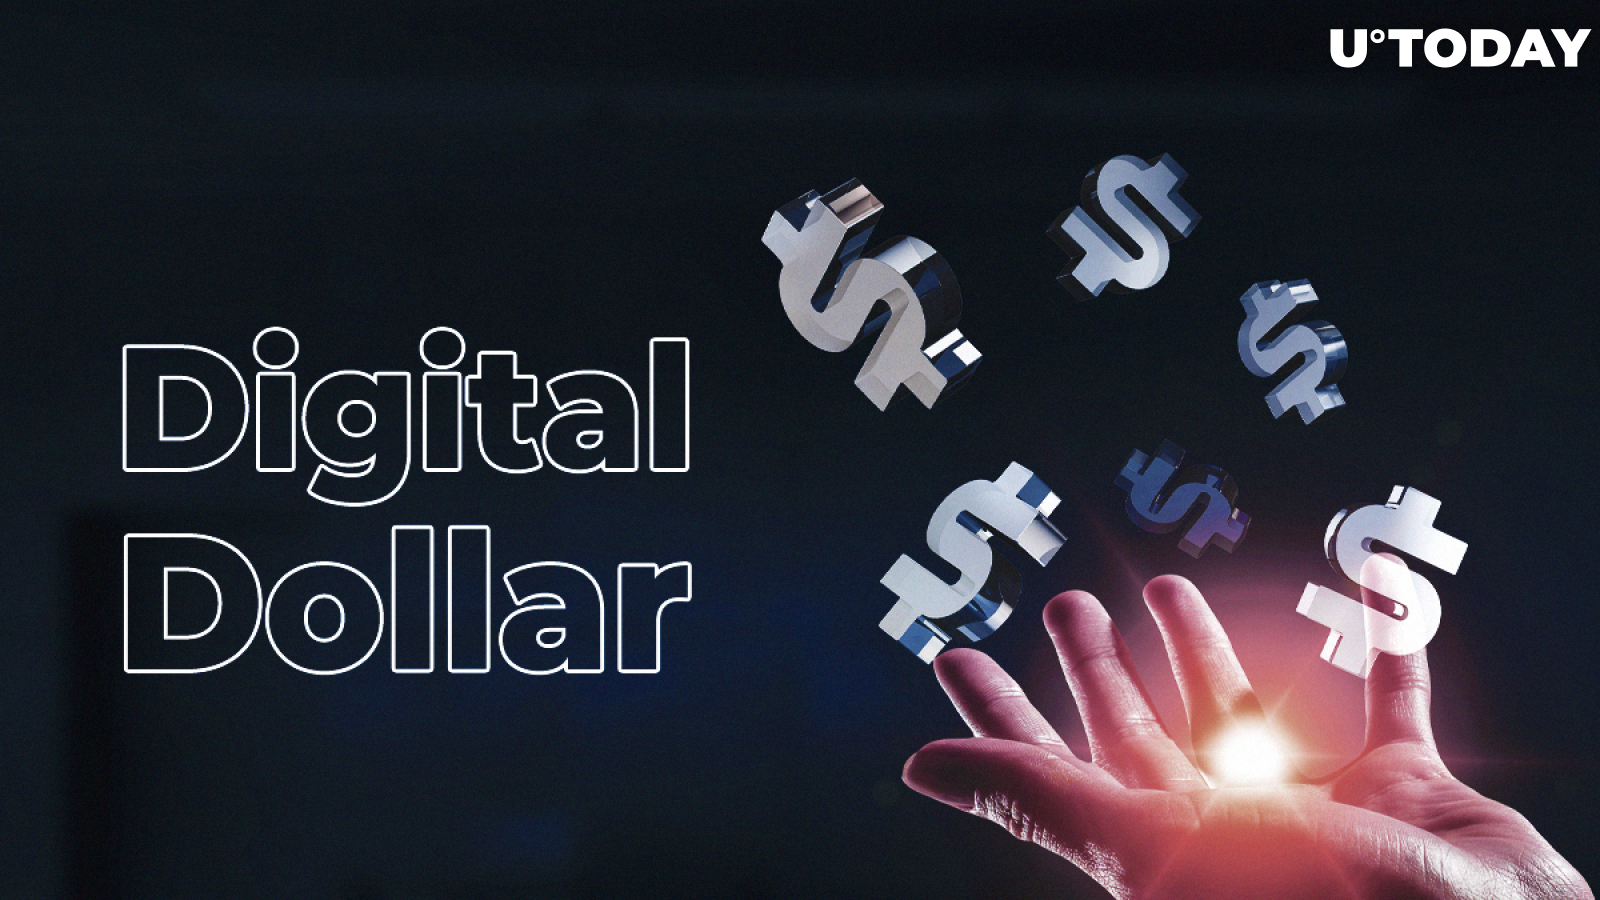 Digital Dollar Project Launched by Former CFTC Chairman and Accenture   